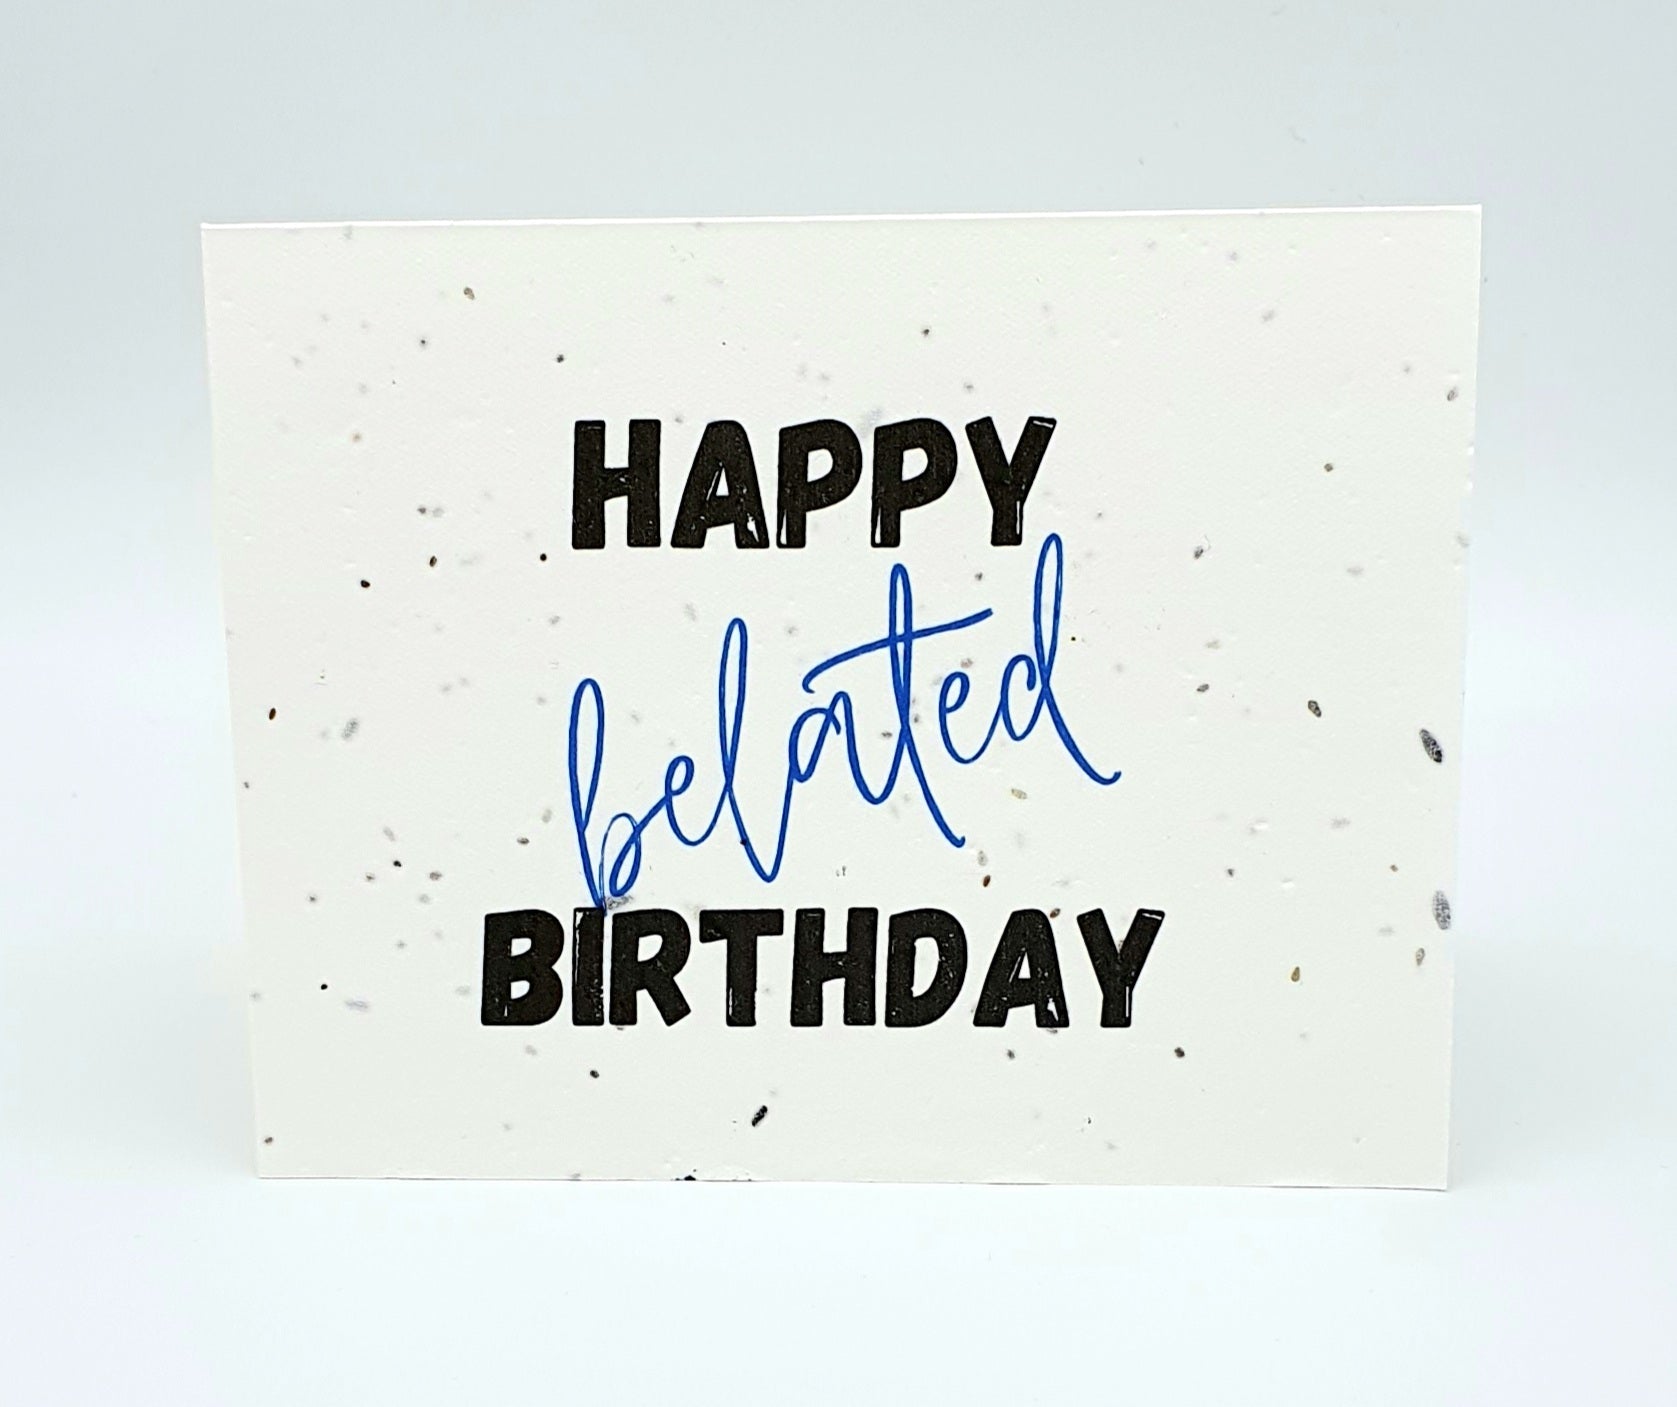 Plantable seed card with "Happy belated Birthday"